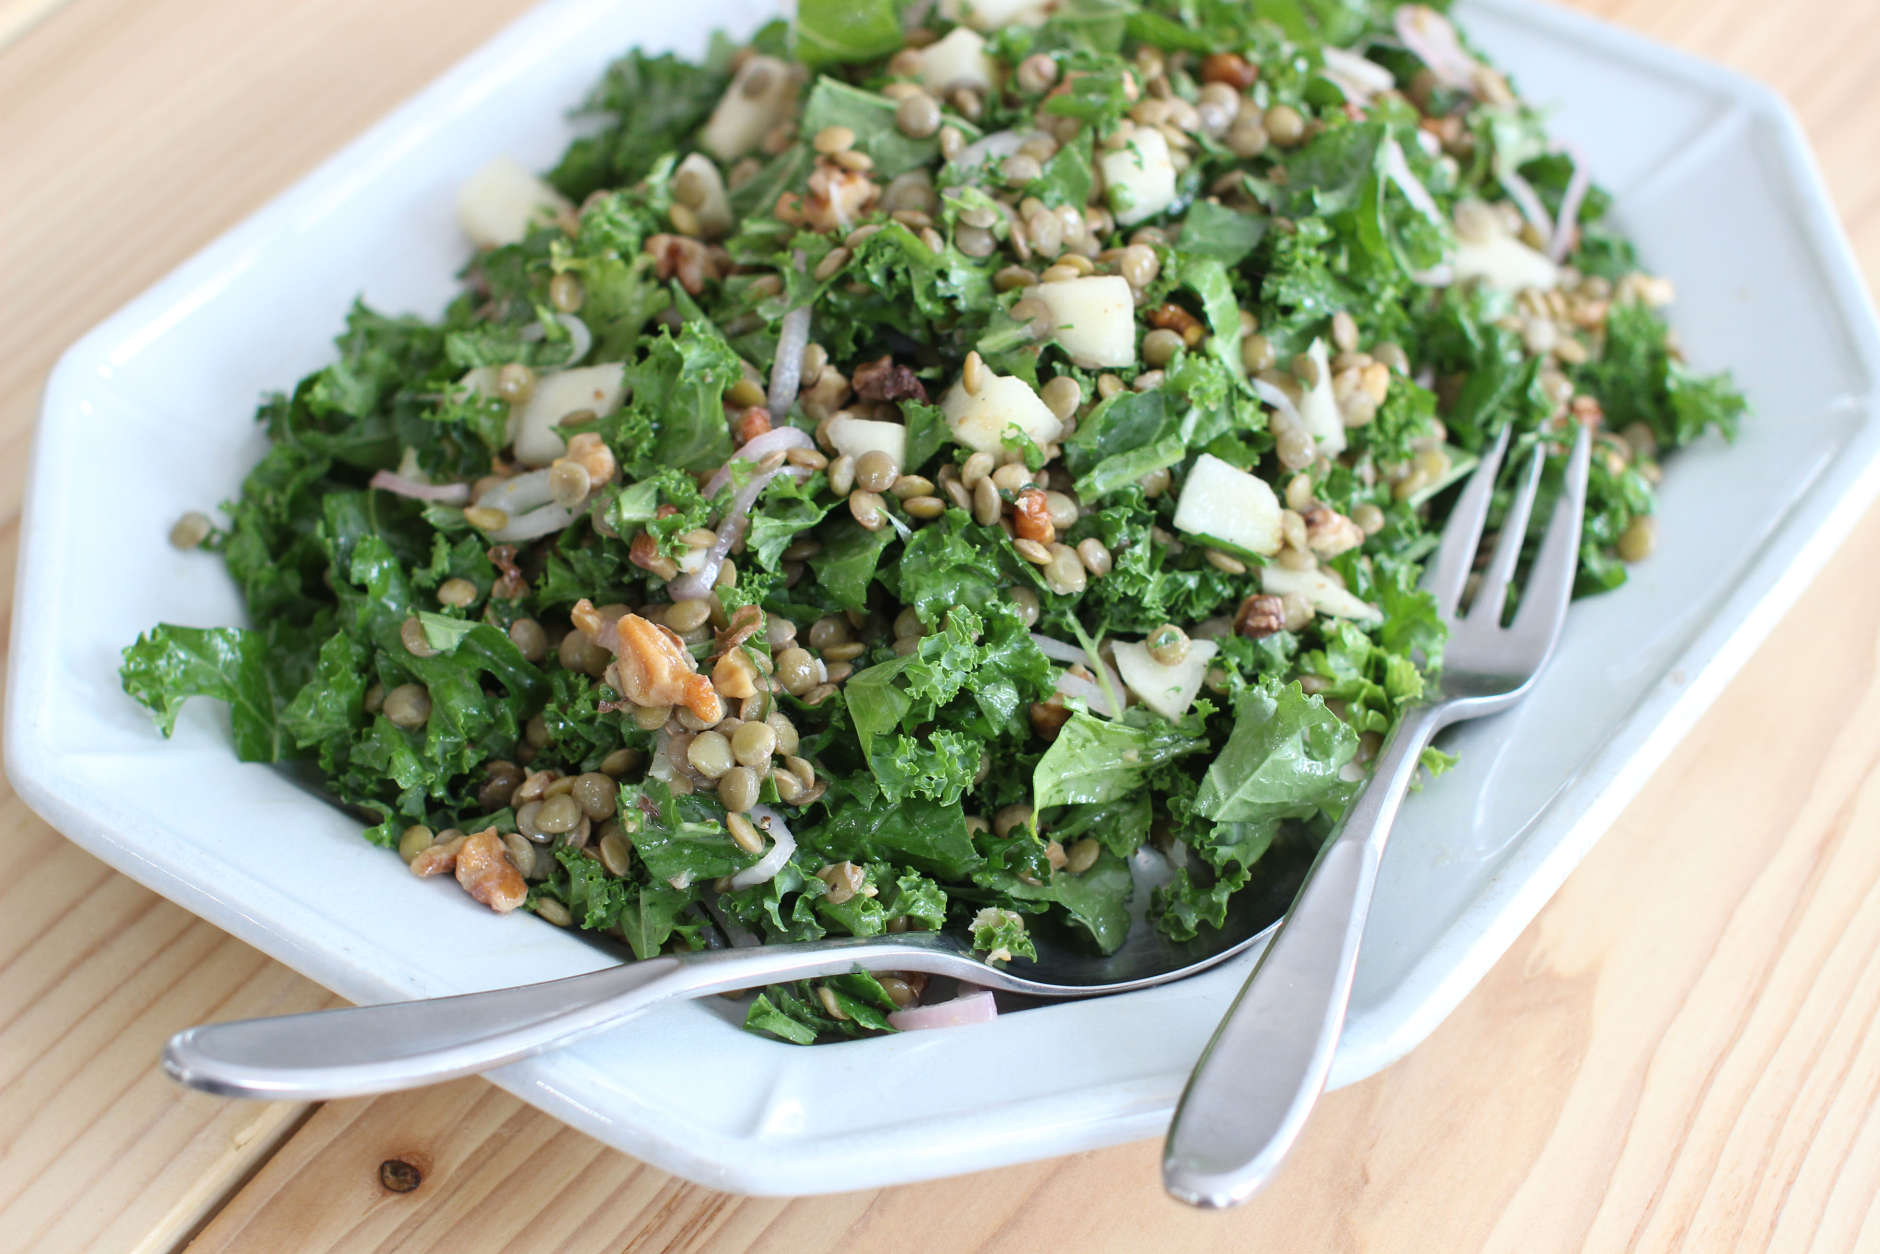 This Feb. 2, 2015, photo shows chopped kale and lentil winter salad in Concord, N.H. This winter salads manages to feel both energizing and comforting at the same time. (AP Photo/Matthew Mead)